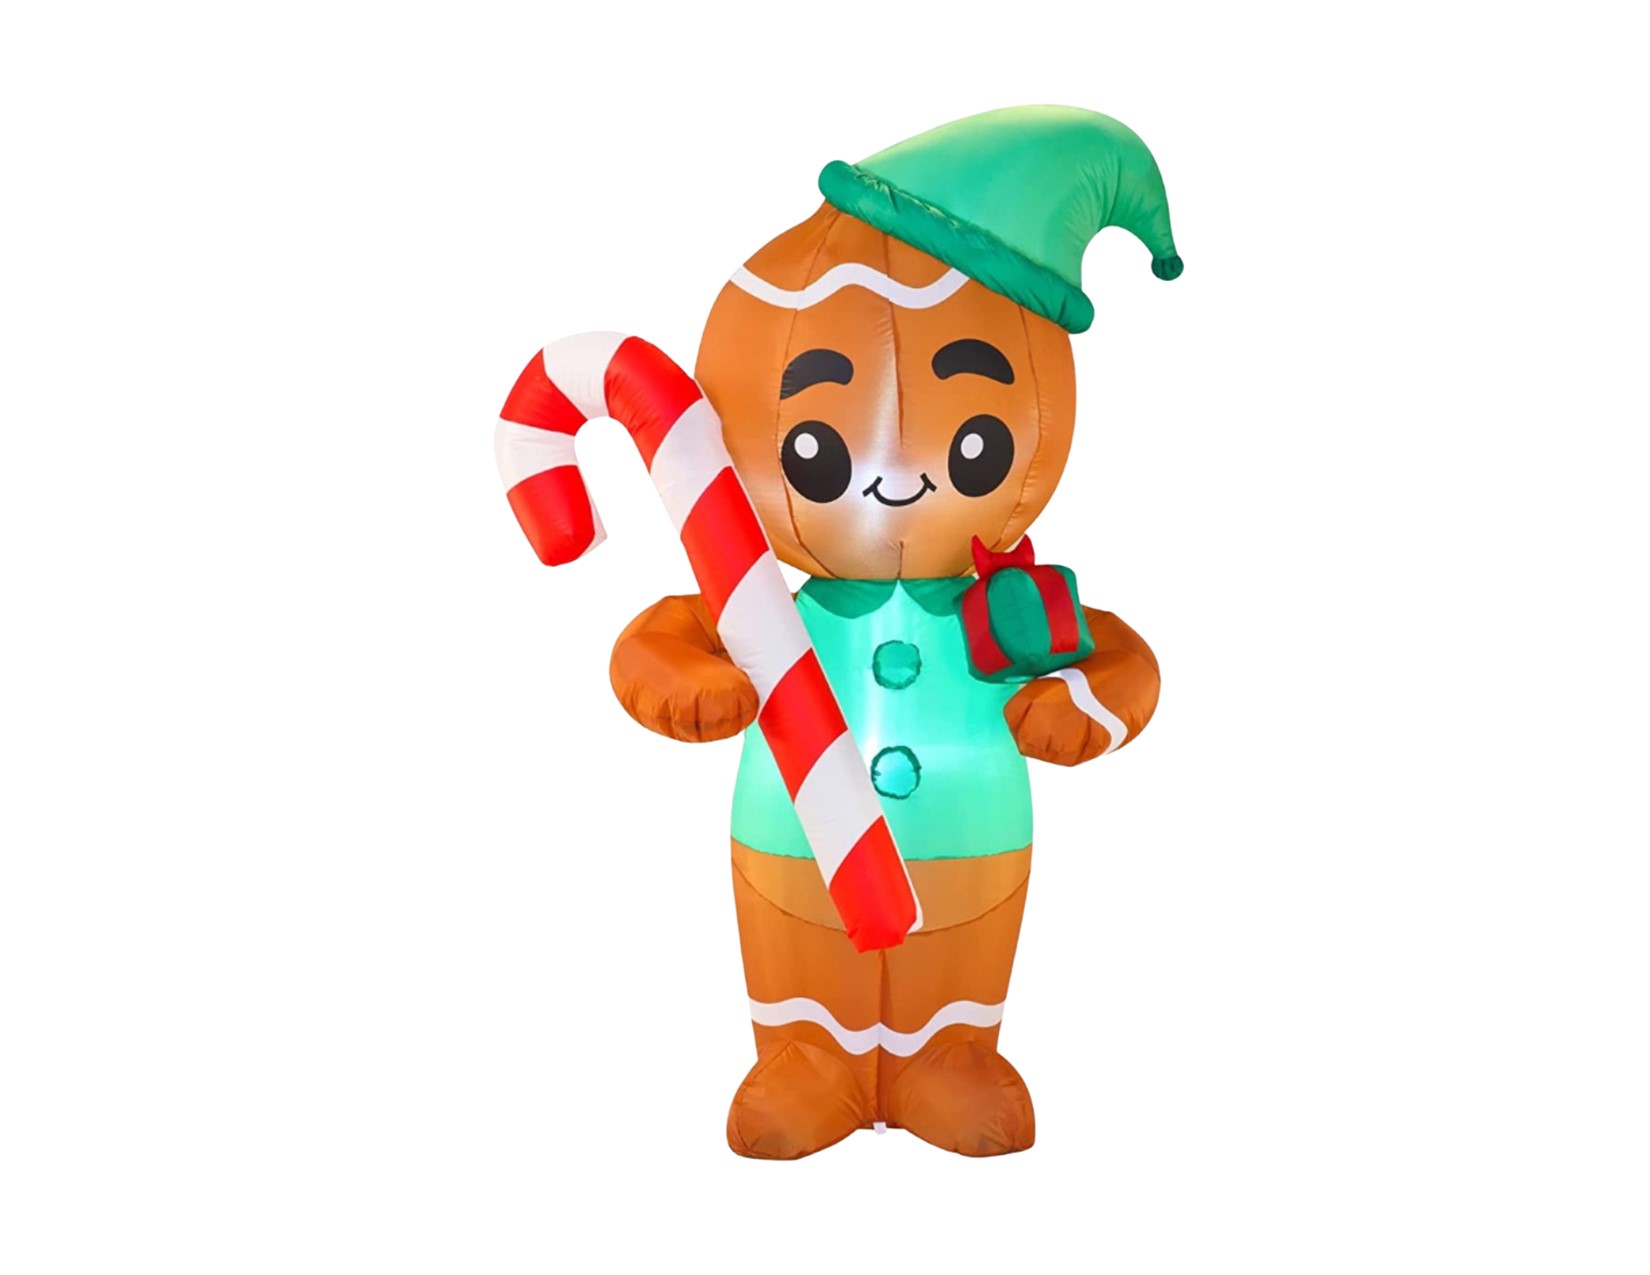 gingerbread man wearing green hat and shirt, holding a red and white candy cane